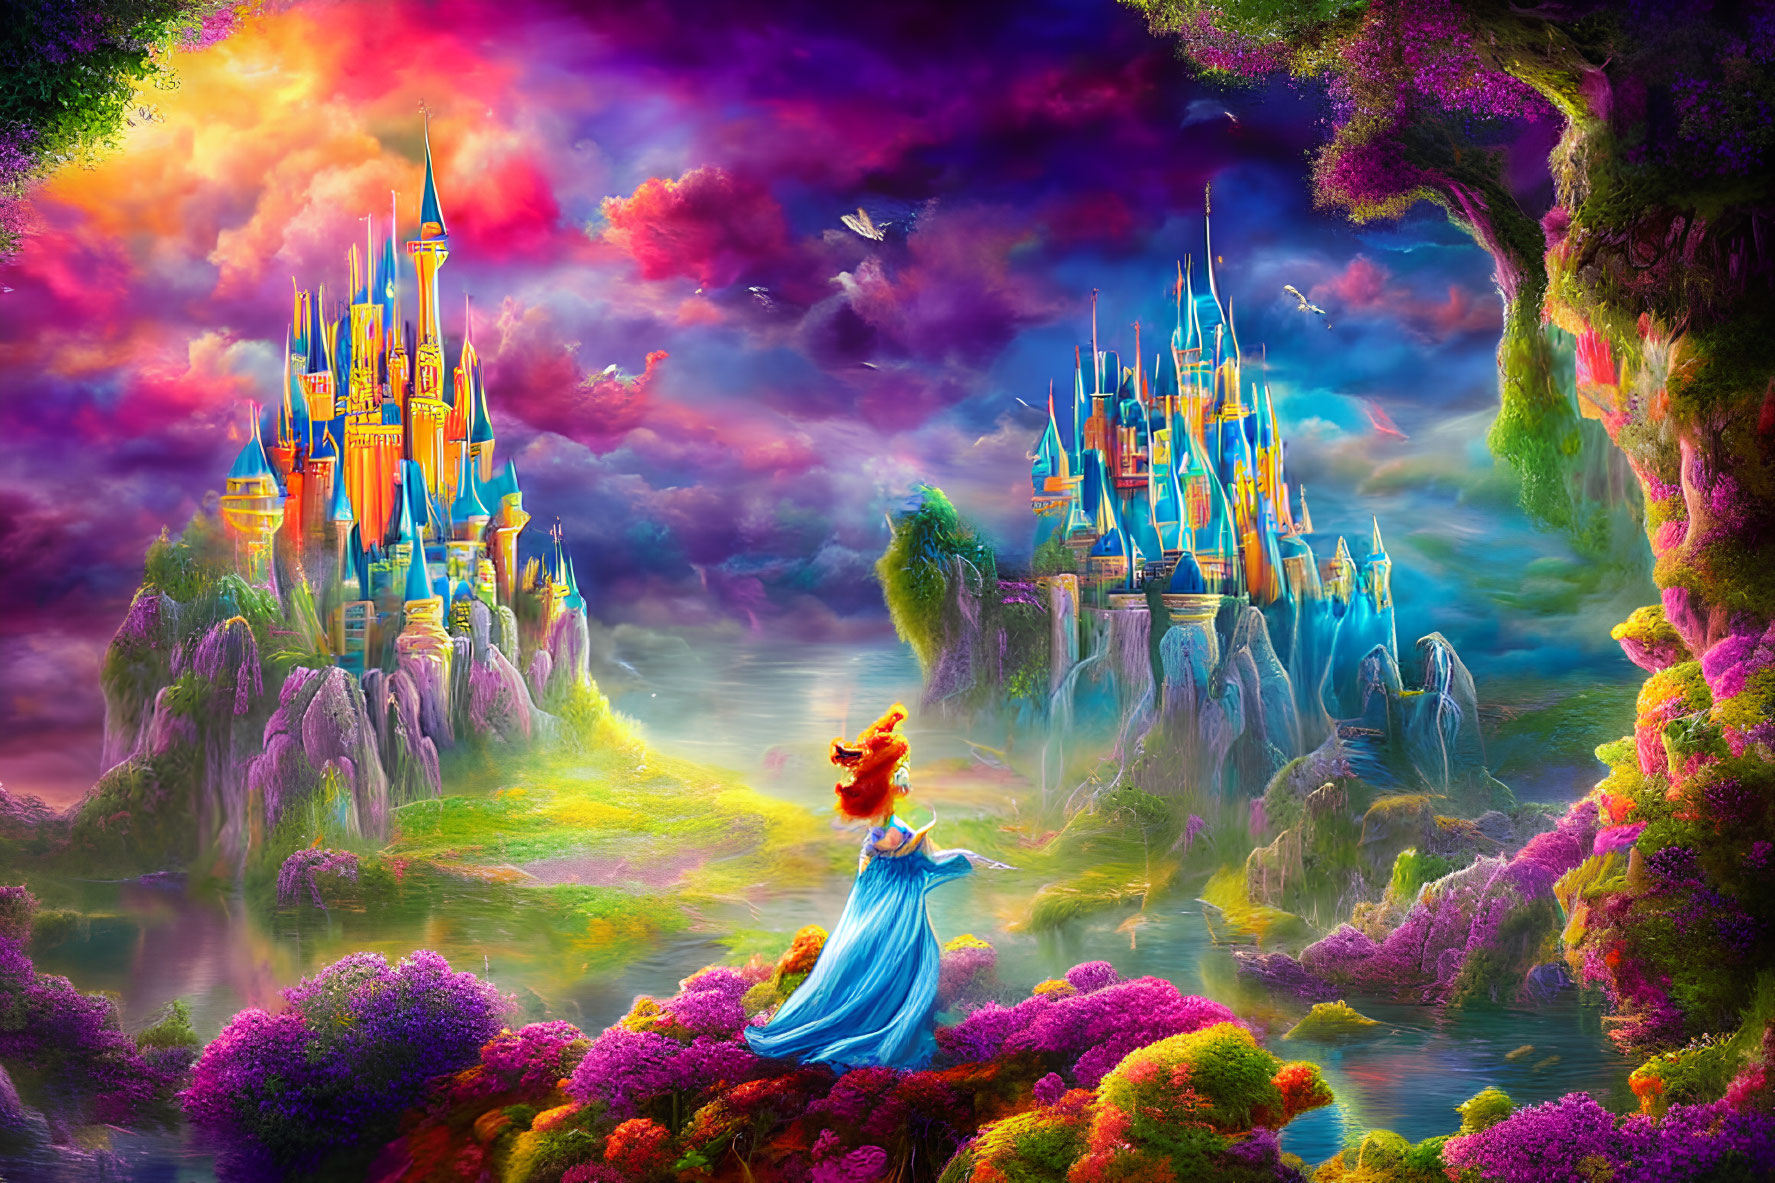 Colorful Fantasy Landscape with Castle, Trees, Birds, and Woman in Blue Dress